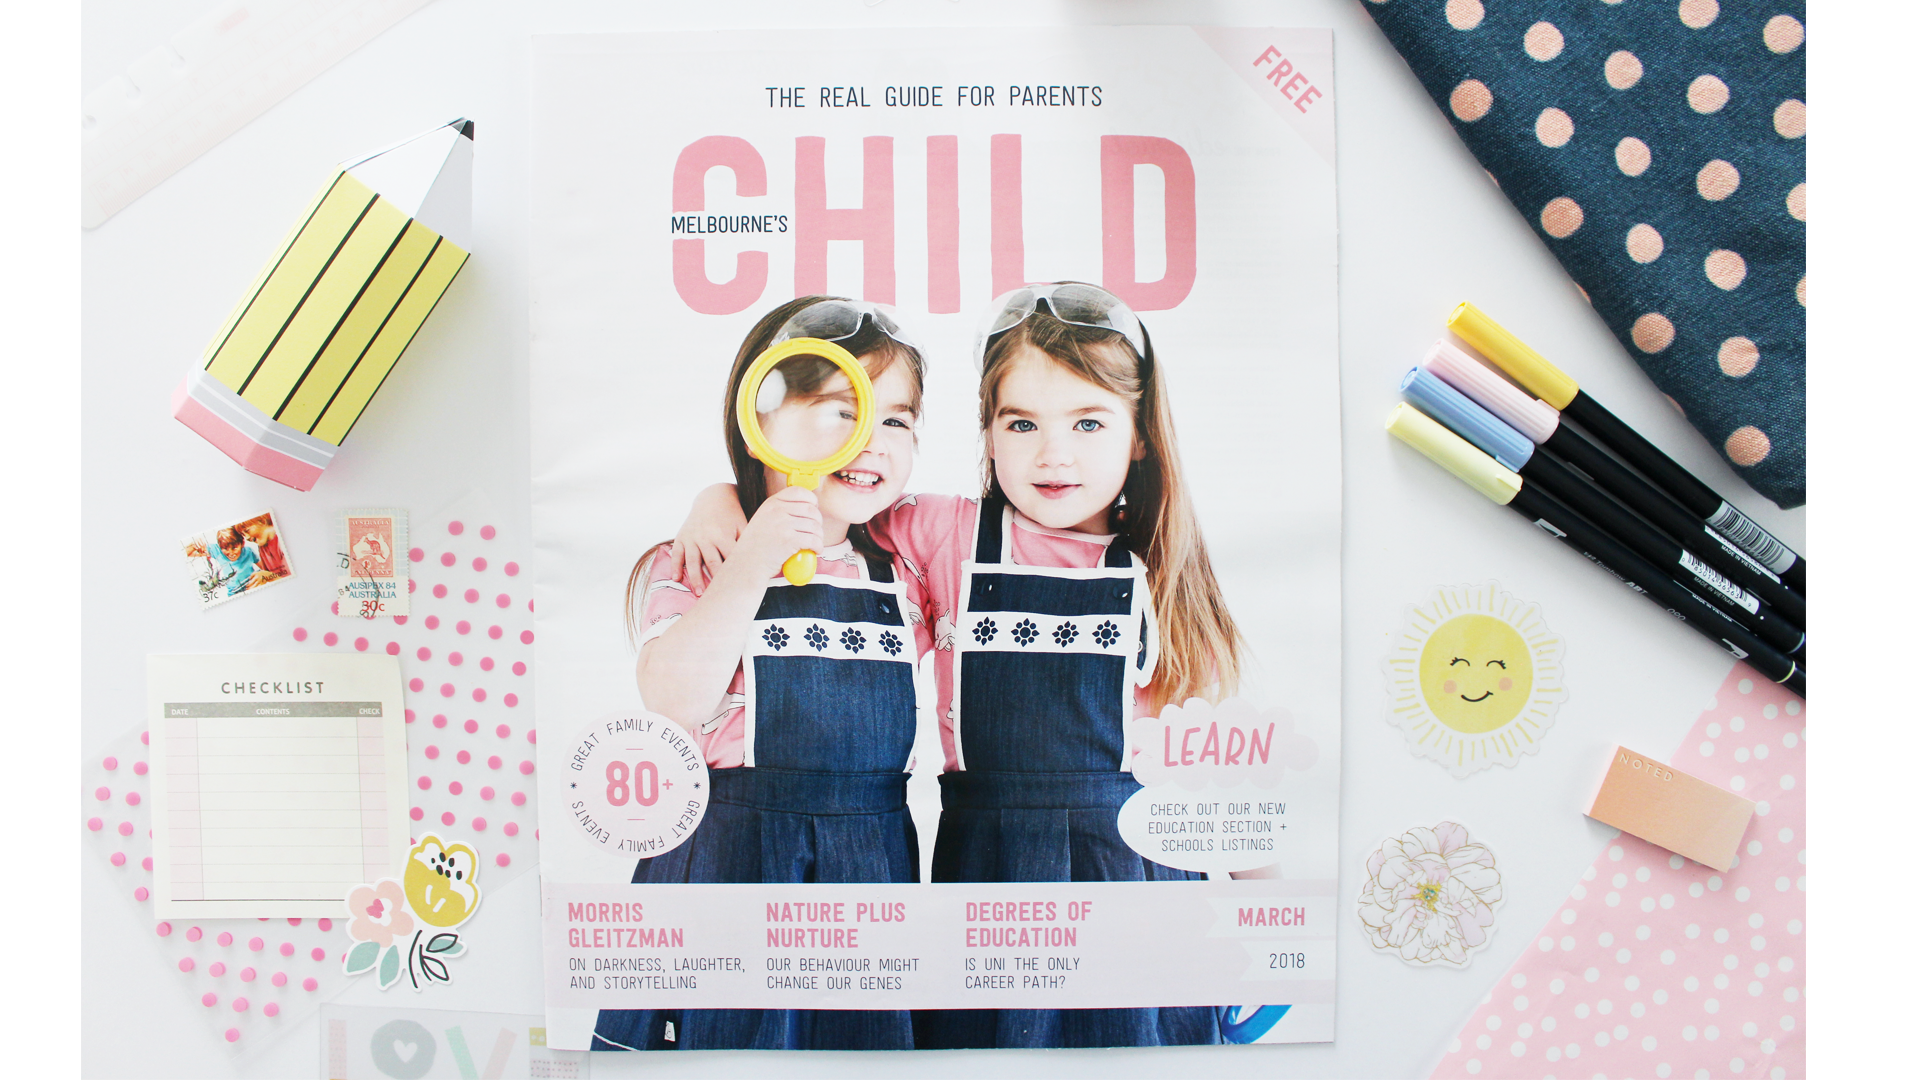 March Issue Of Child Magazines